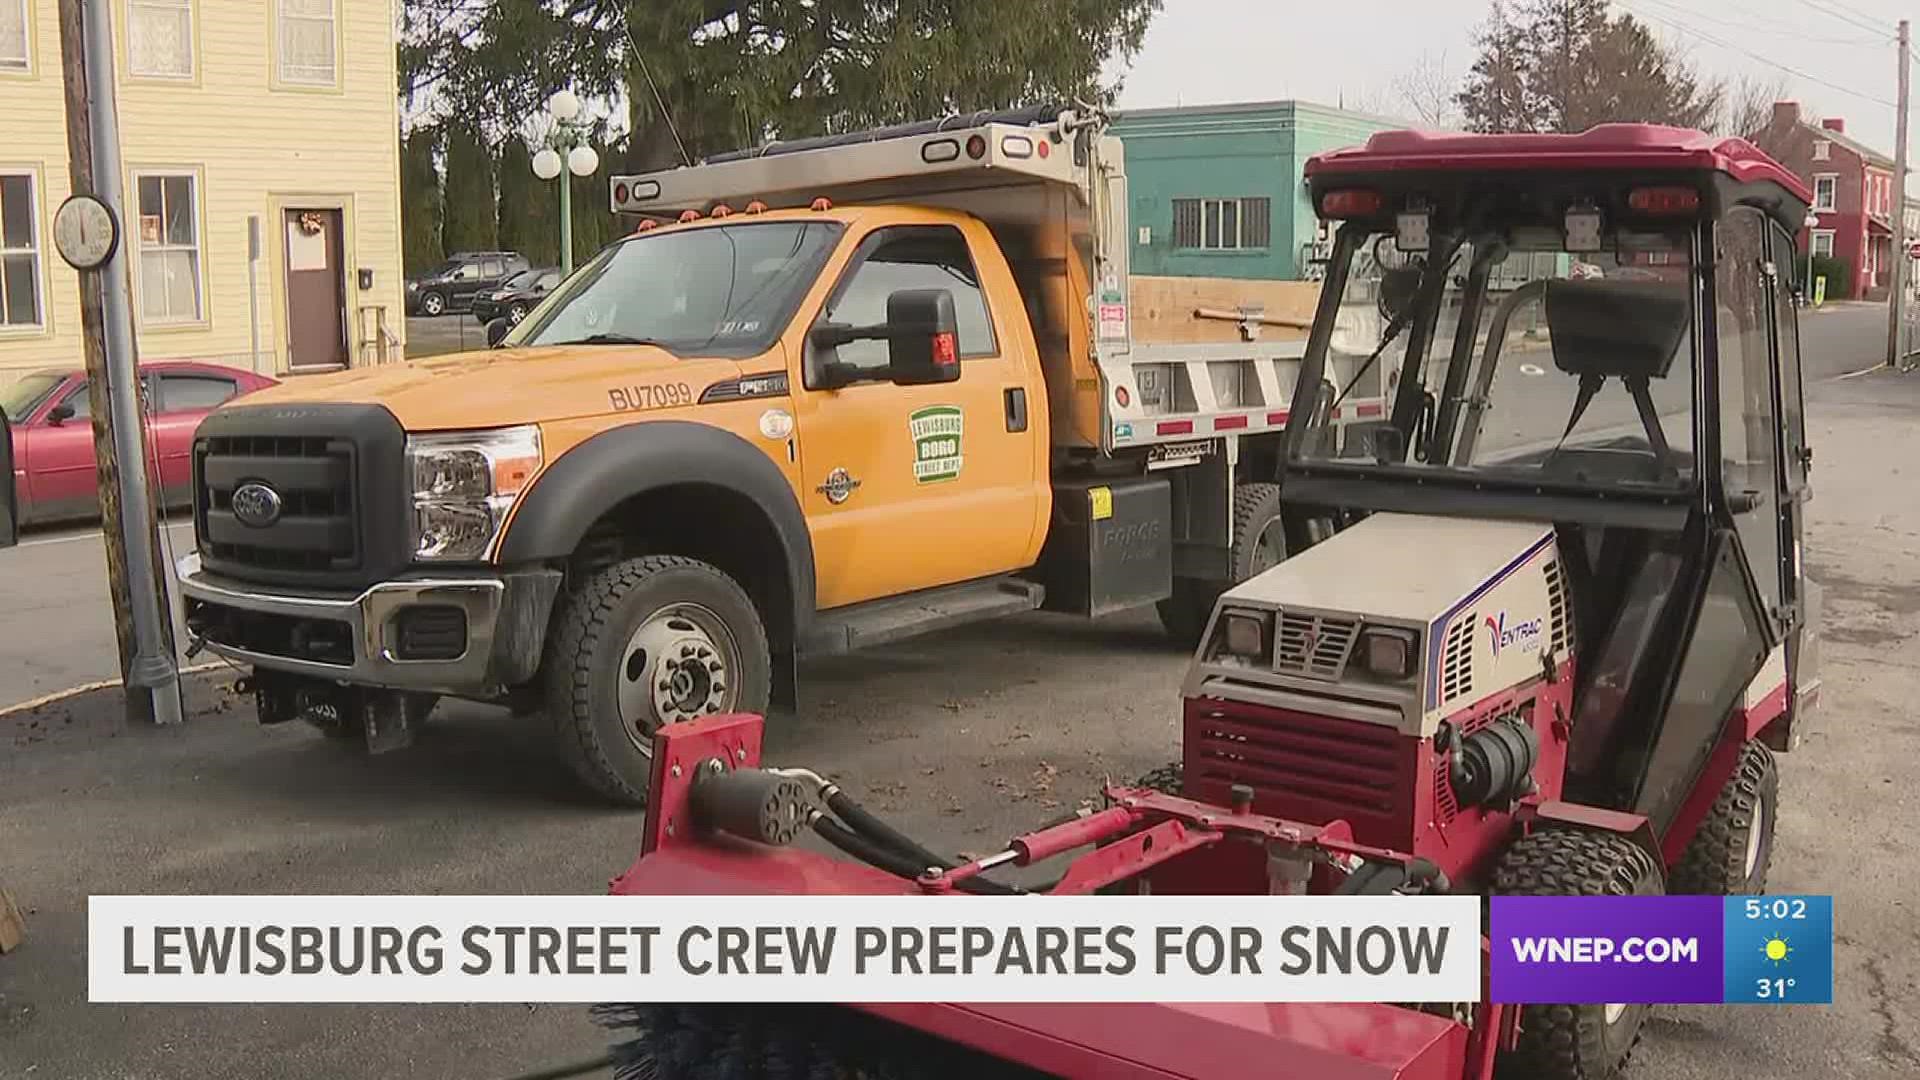 Workers in Lewisburg spent the day getting their equipment ready as wintry weather is expected over the next two days.